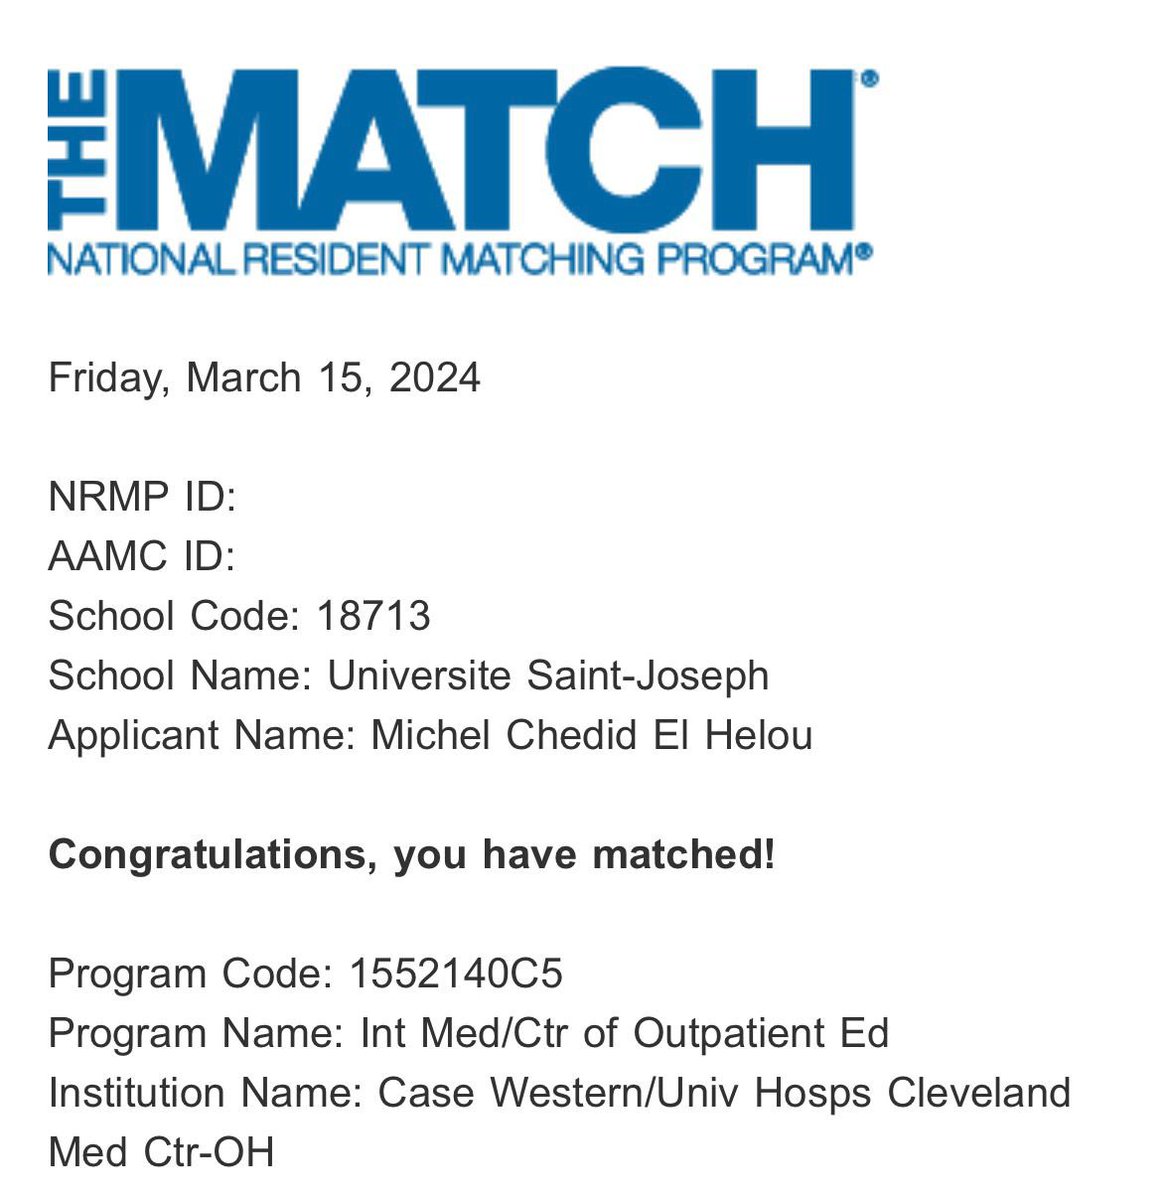 Super excited to have matched at the amazing @CaseUHmed @UHhospitals for IM Residency! 🩺🏥 Beyond grateful for everyone who made this possible, including my mentors and colleagues at @ClevelandClinic, my dear friends, and my family ❤️ Looking forward to this new chapter!